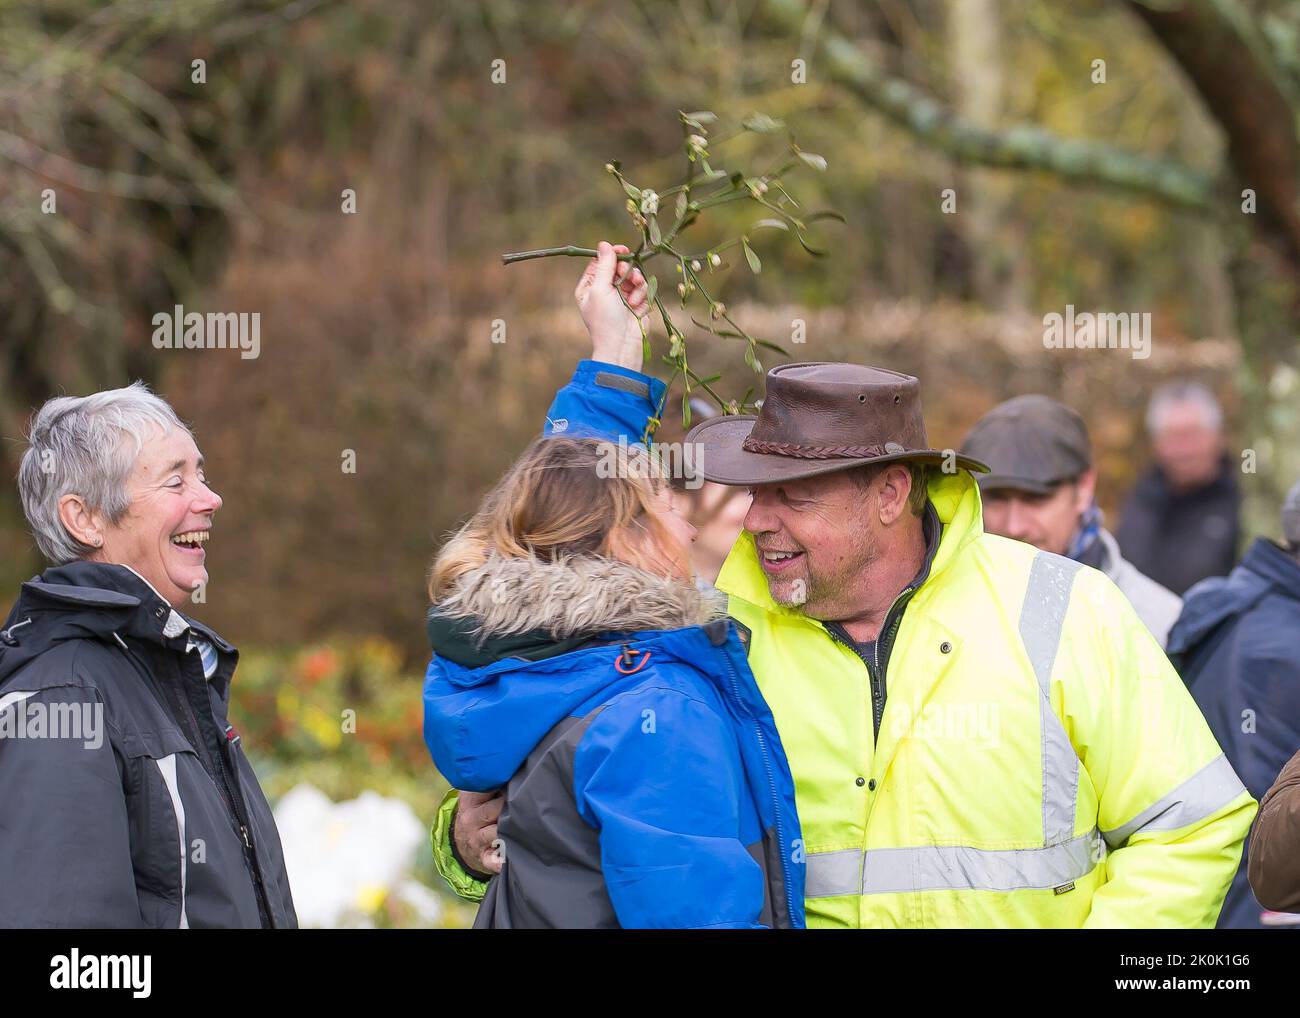 Tenbury Wells, UK. 26th November, 2019. Kissing under the mistletoe at Tenbury Wells annual Mistletoe and Holly Auction. In spite of the wet and dreary weather, nothing dampens the spirit of these UK buyers as they flock to the Worcestershire town of Tenbury Wells for the annual Mistletoe and Holly Auction. With UK farmers and growers offering such a staggering selection of freshly-cut, berry-laden lots for this event, buyers flock from far and wide to secure the finest festive foliage for their business' countdown to Christmas. Credit: Lee Hudson Stock Photo